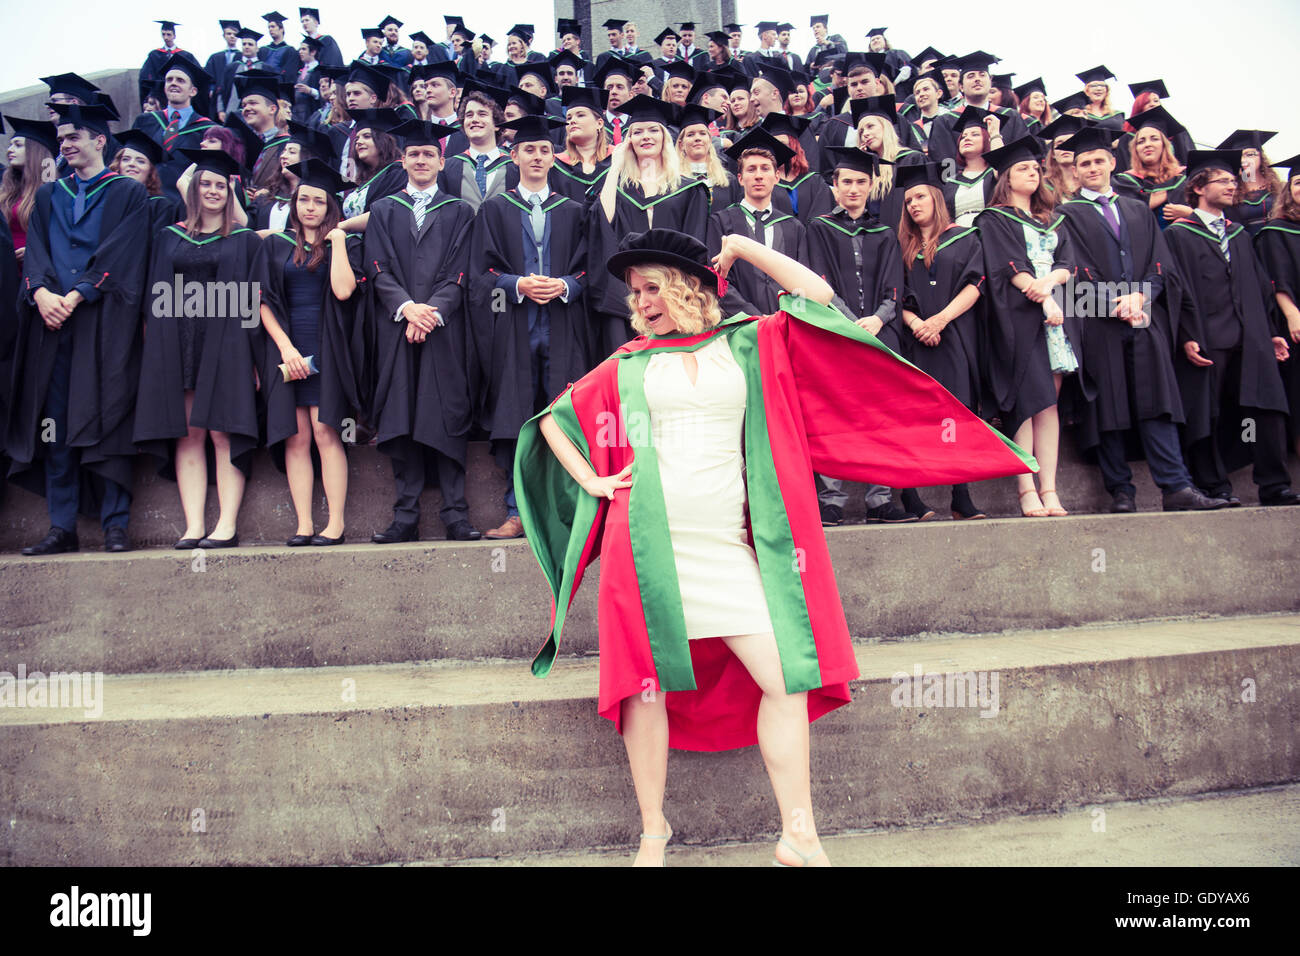 Higher Education in the UK:  A successful woman PhD (Doctoral) degree graduate standing and posing in front of a group Aberystwyth university students wearing traditional gowns, capes and mortar boards at their graduation day ceremony, July  2016 Stock Photo